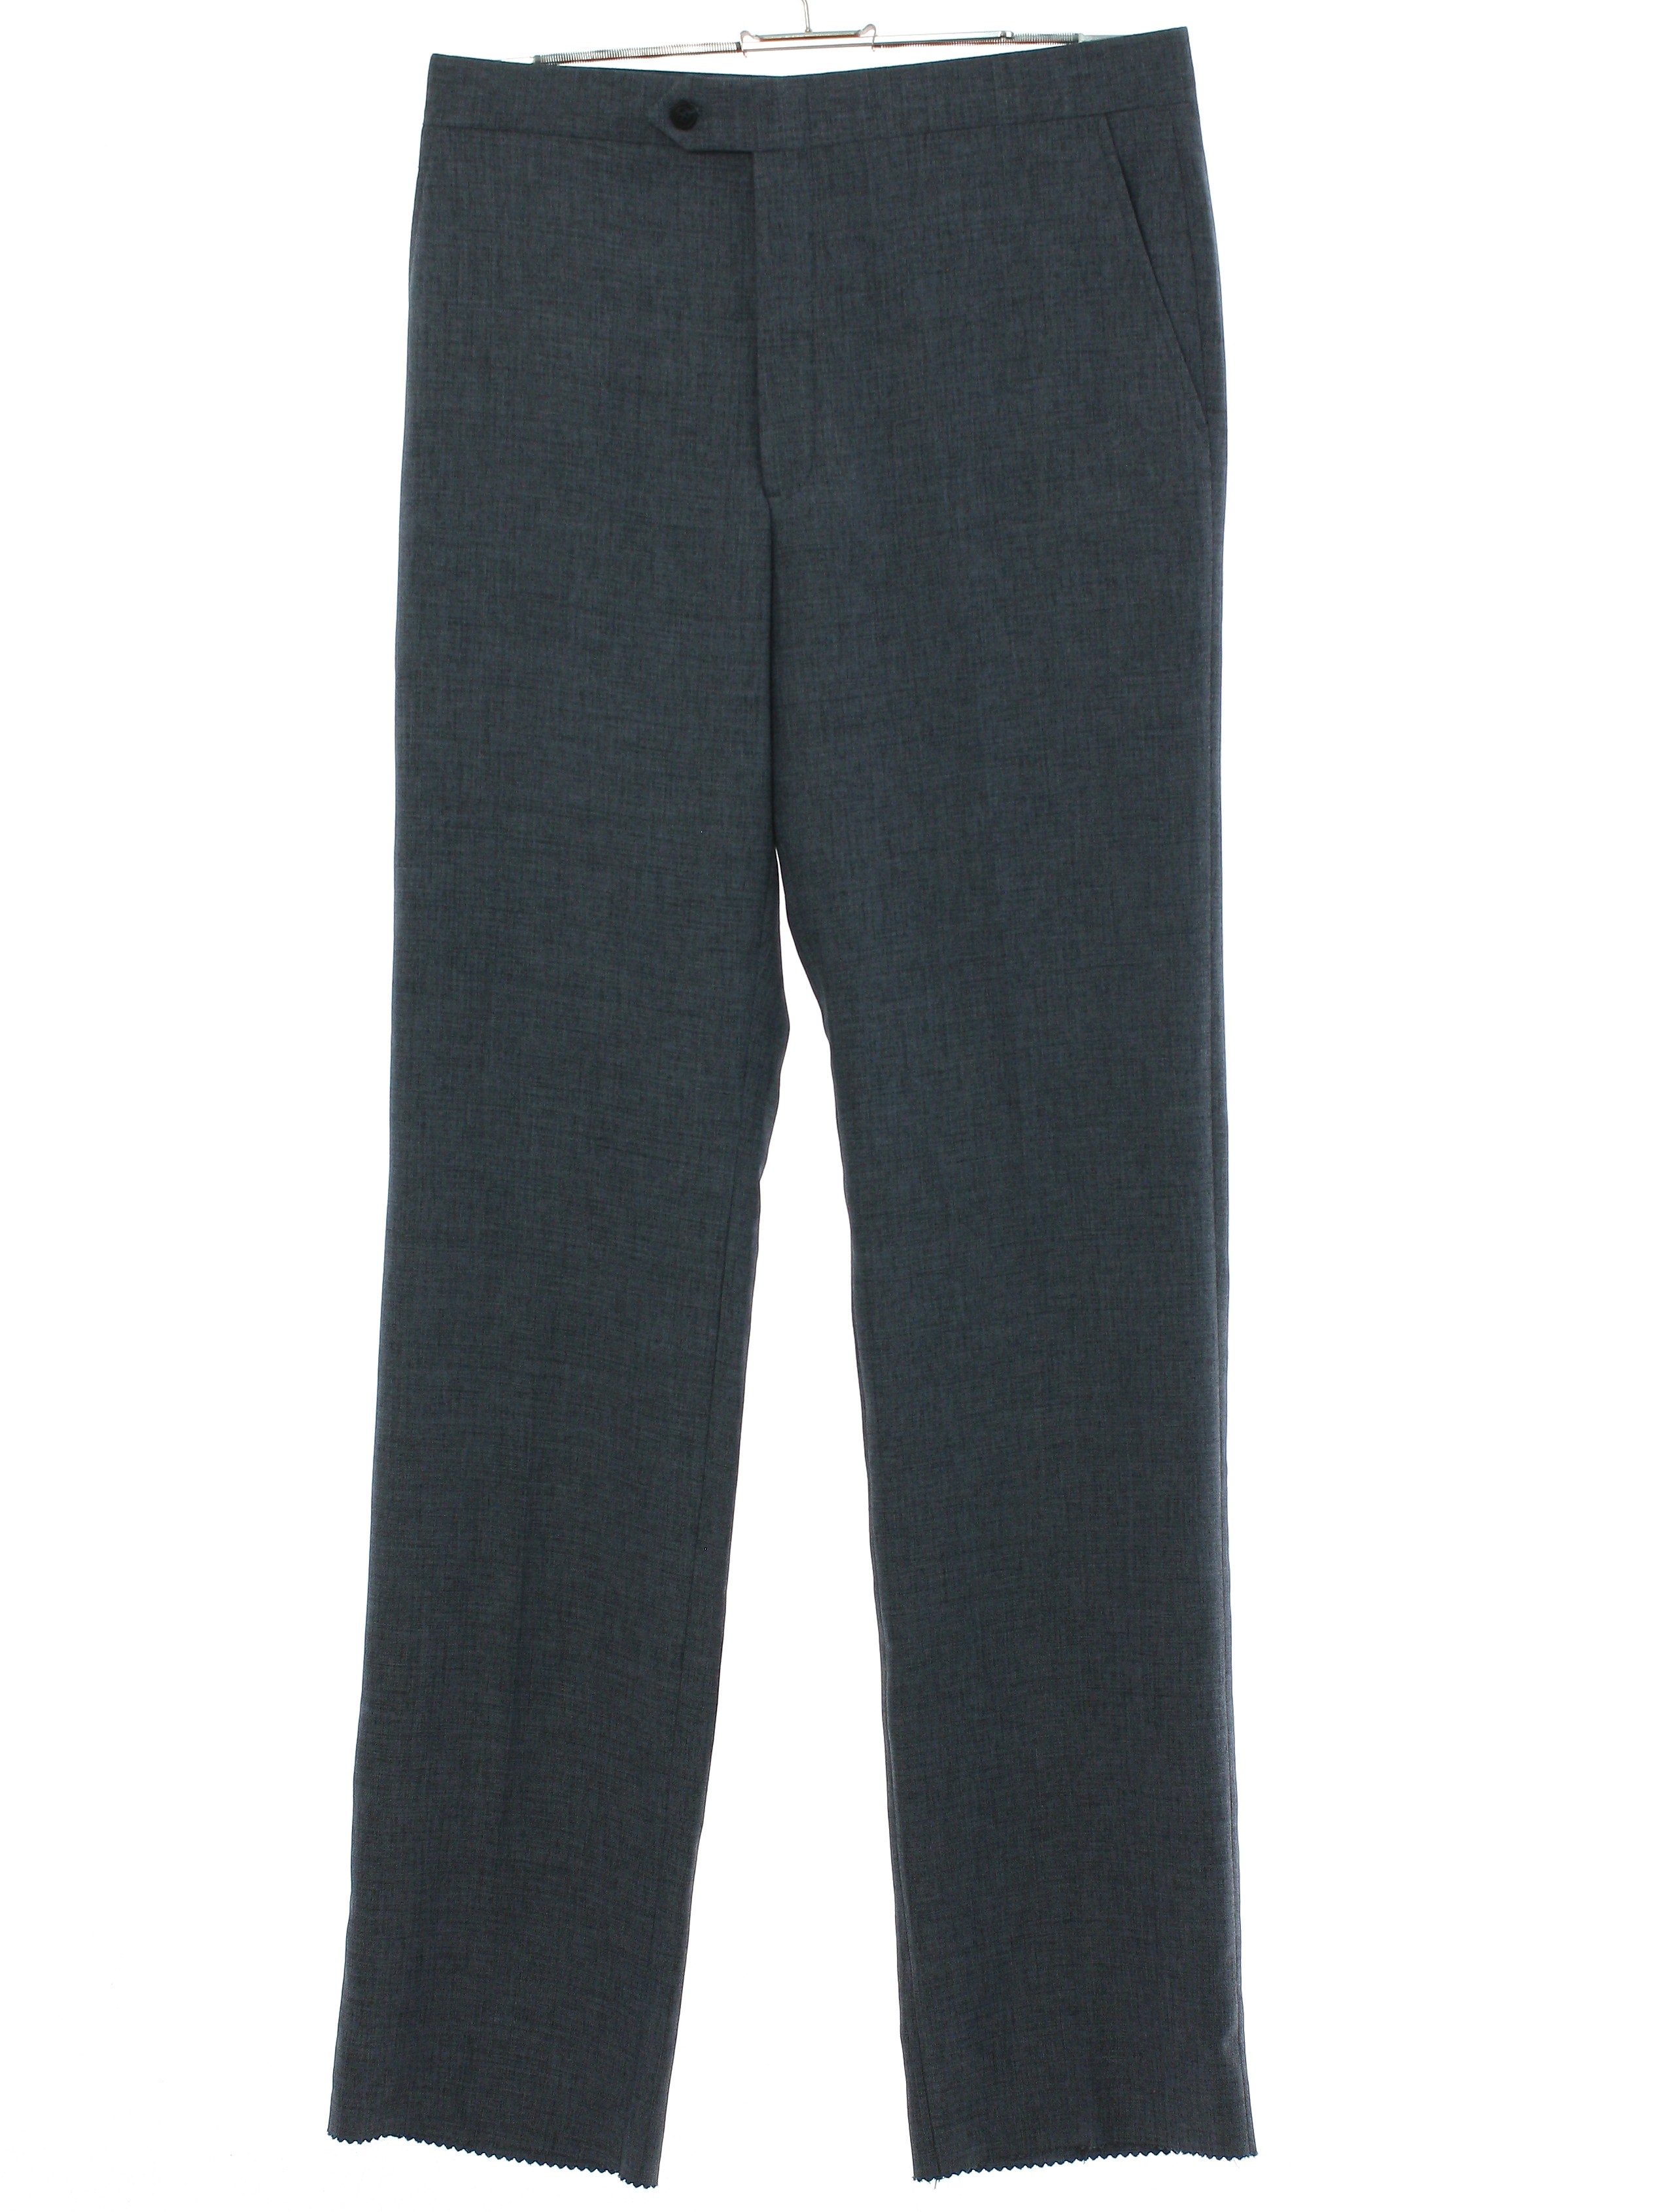 Vintage 1980's Pants: 80s -Leeds- Mens heathered blue-gray polyester ...